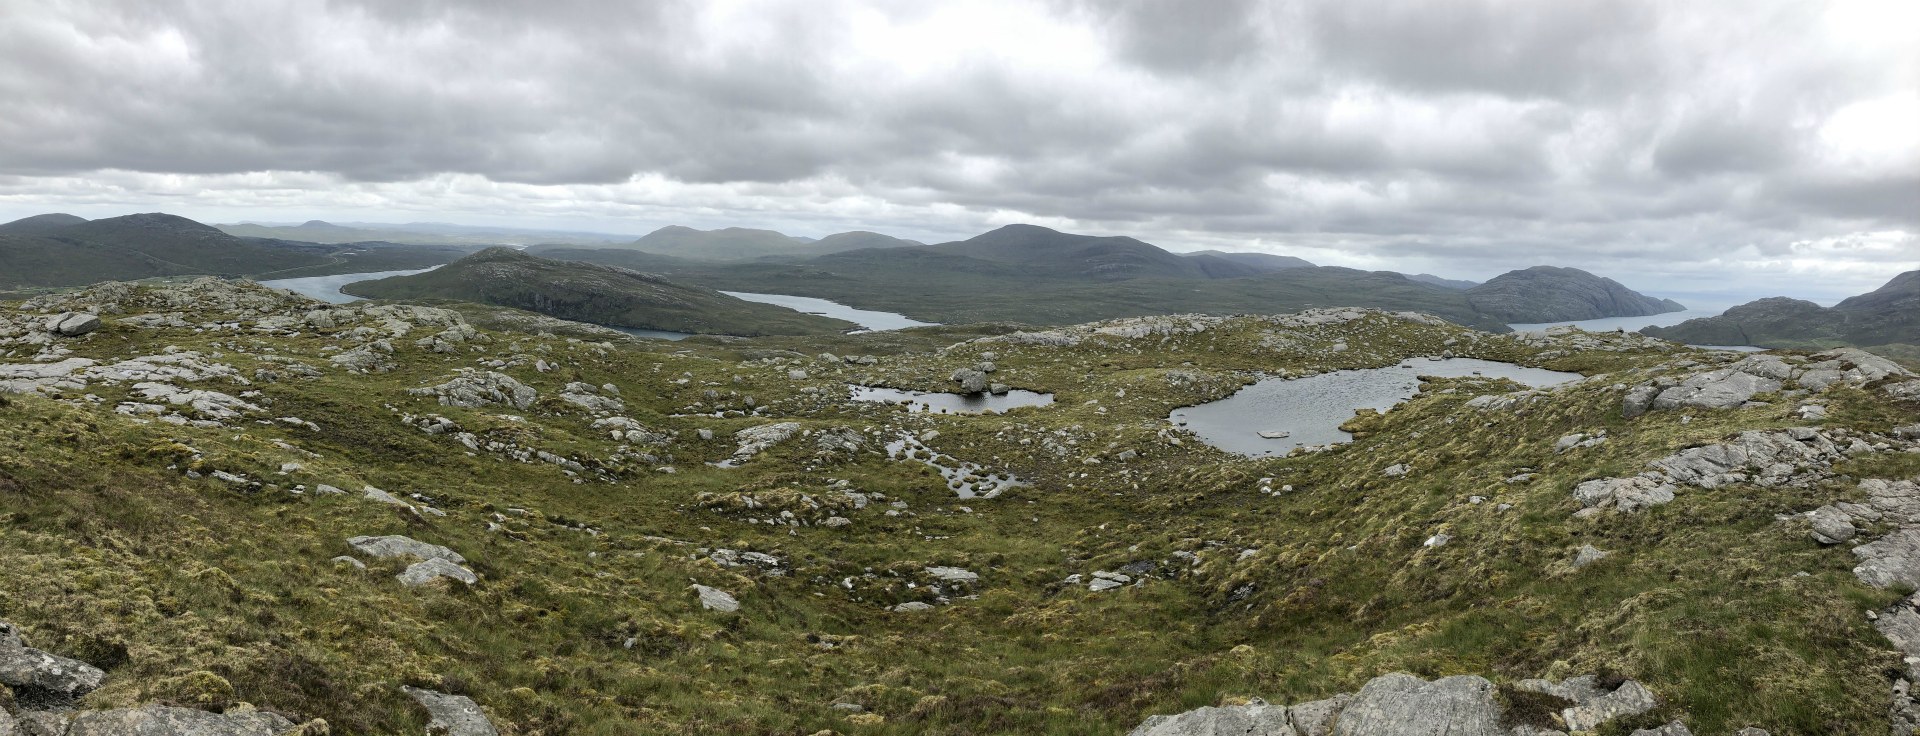 View from Cleit Ard, Isle of Harris